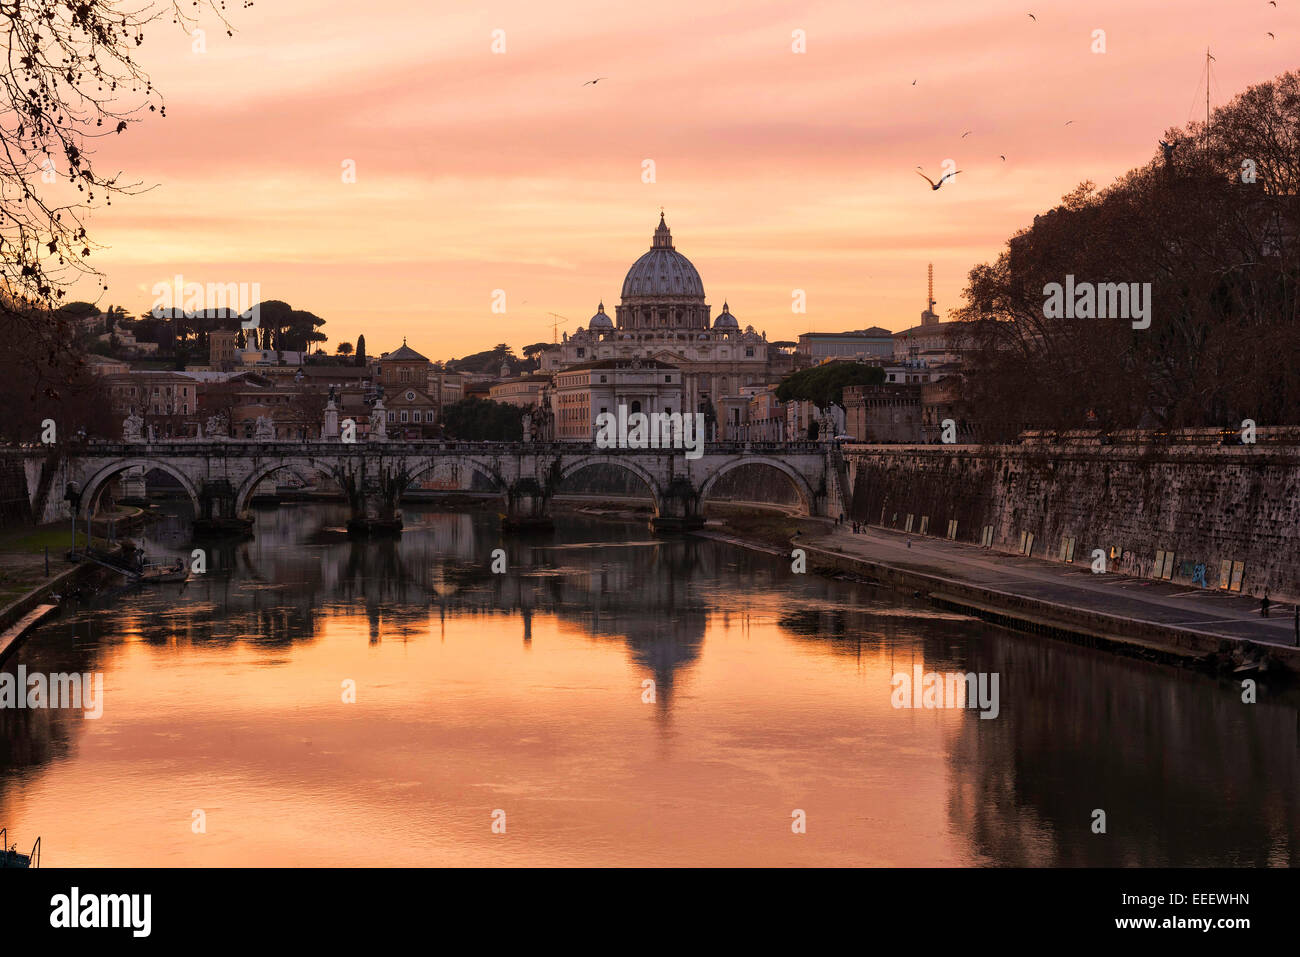 Roma, capital of Italy. The magic atmosphere of sunset with San Pietro and Vaticano, overlooking the Tevere and its bridges. Stock Photo